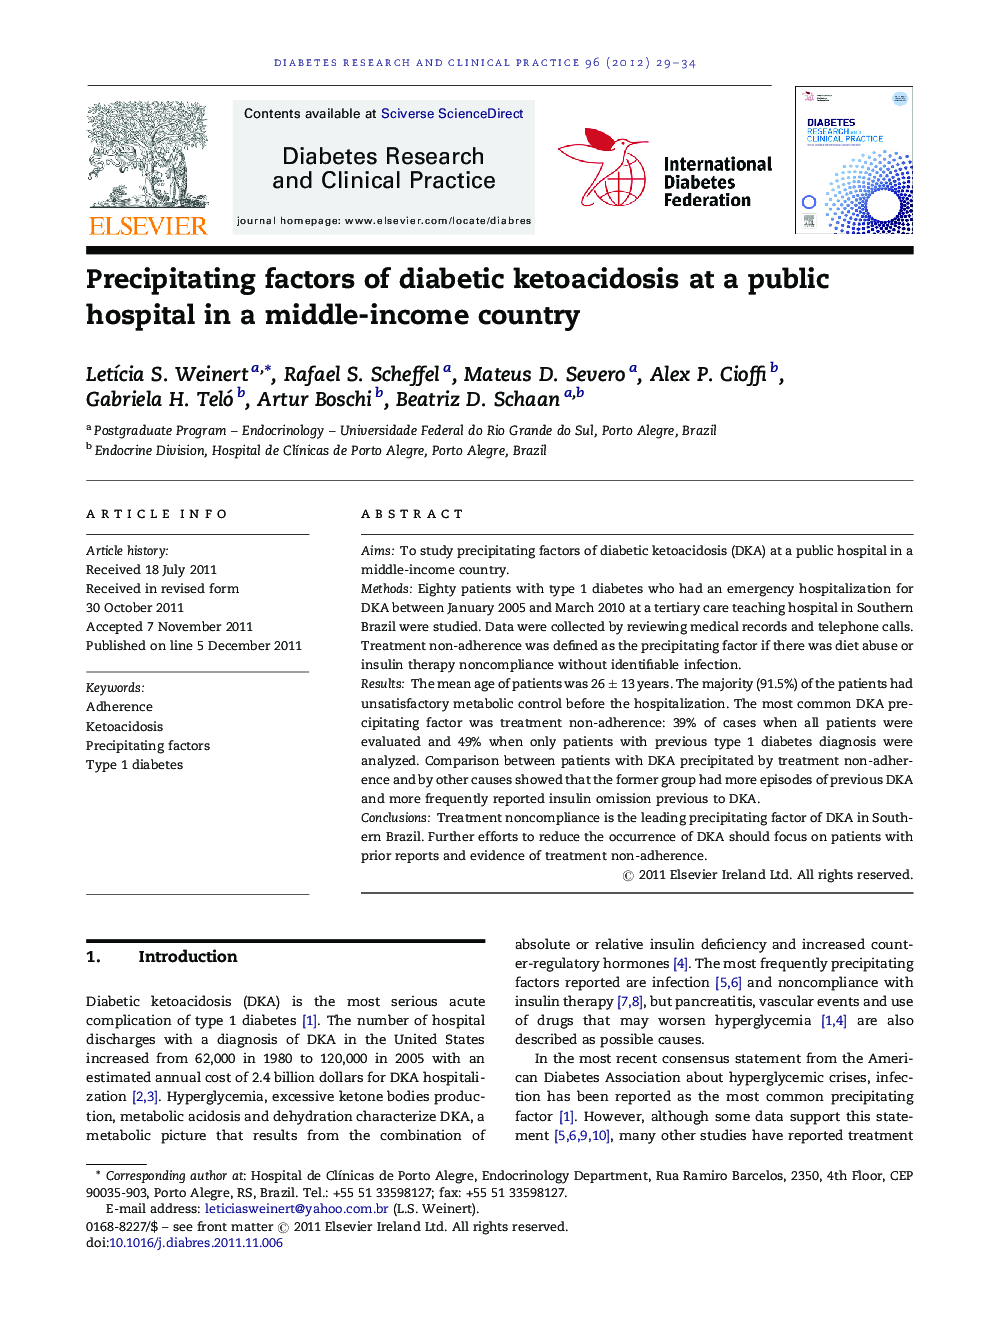 Precipitating factors of diabetic ketoacidosis at a public hospital in a middle-income country